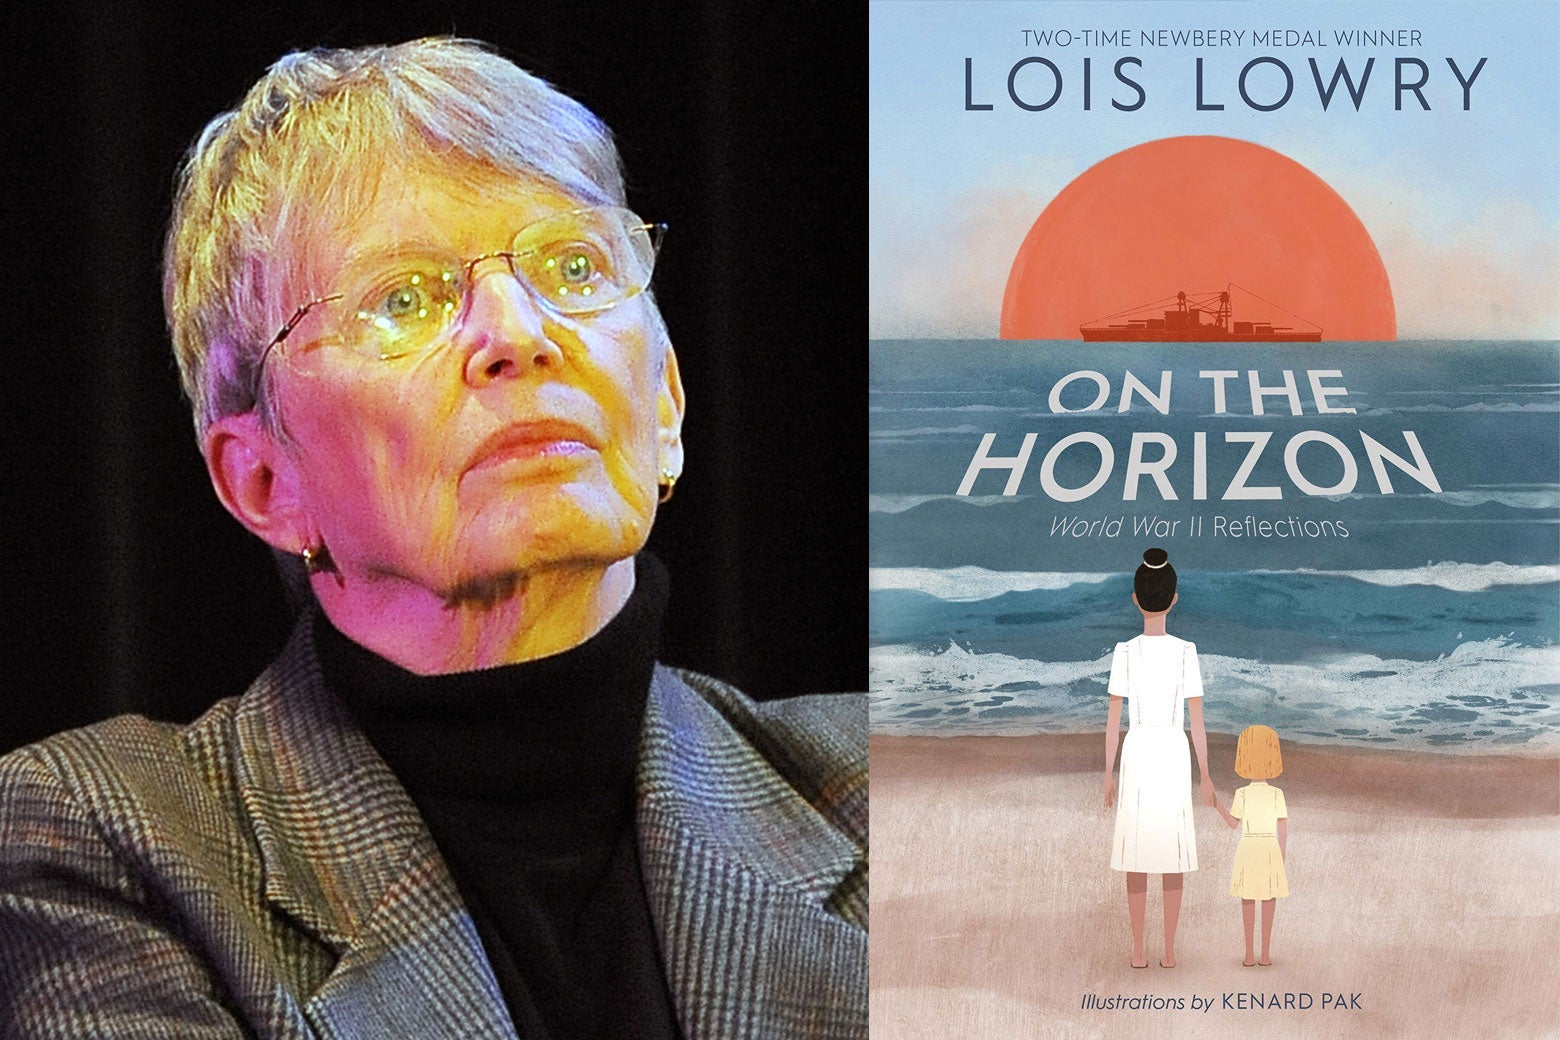 Lois Lowry and the cover of On the Horizon.